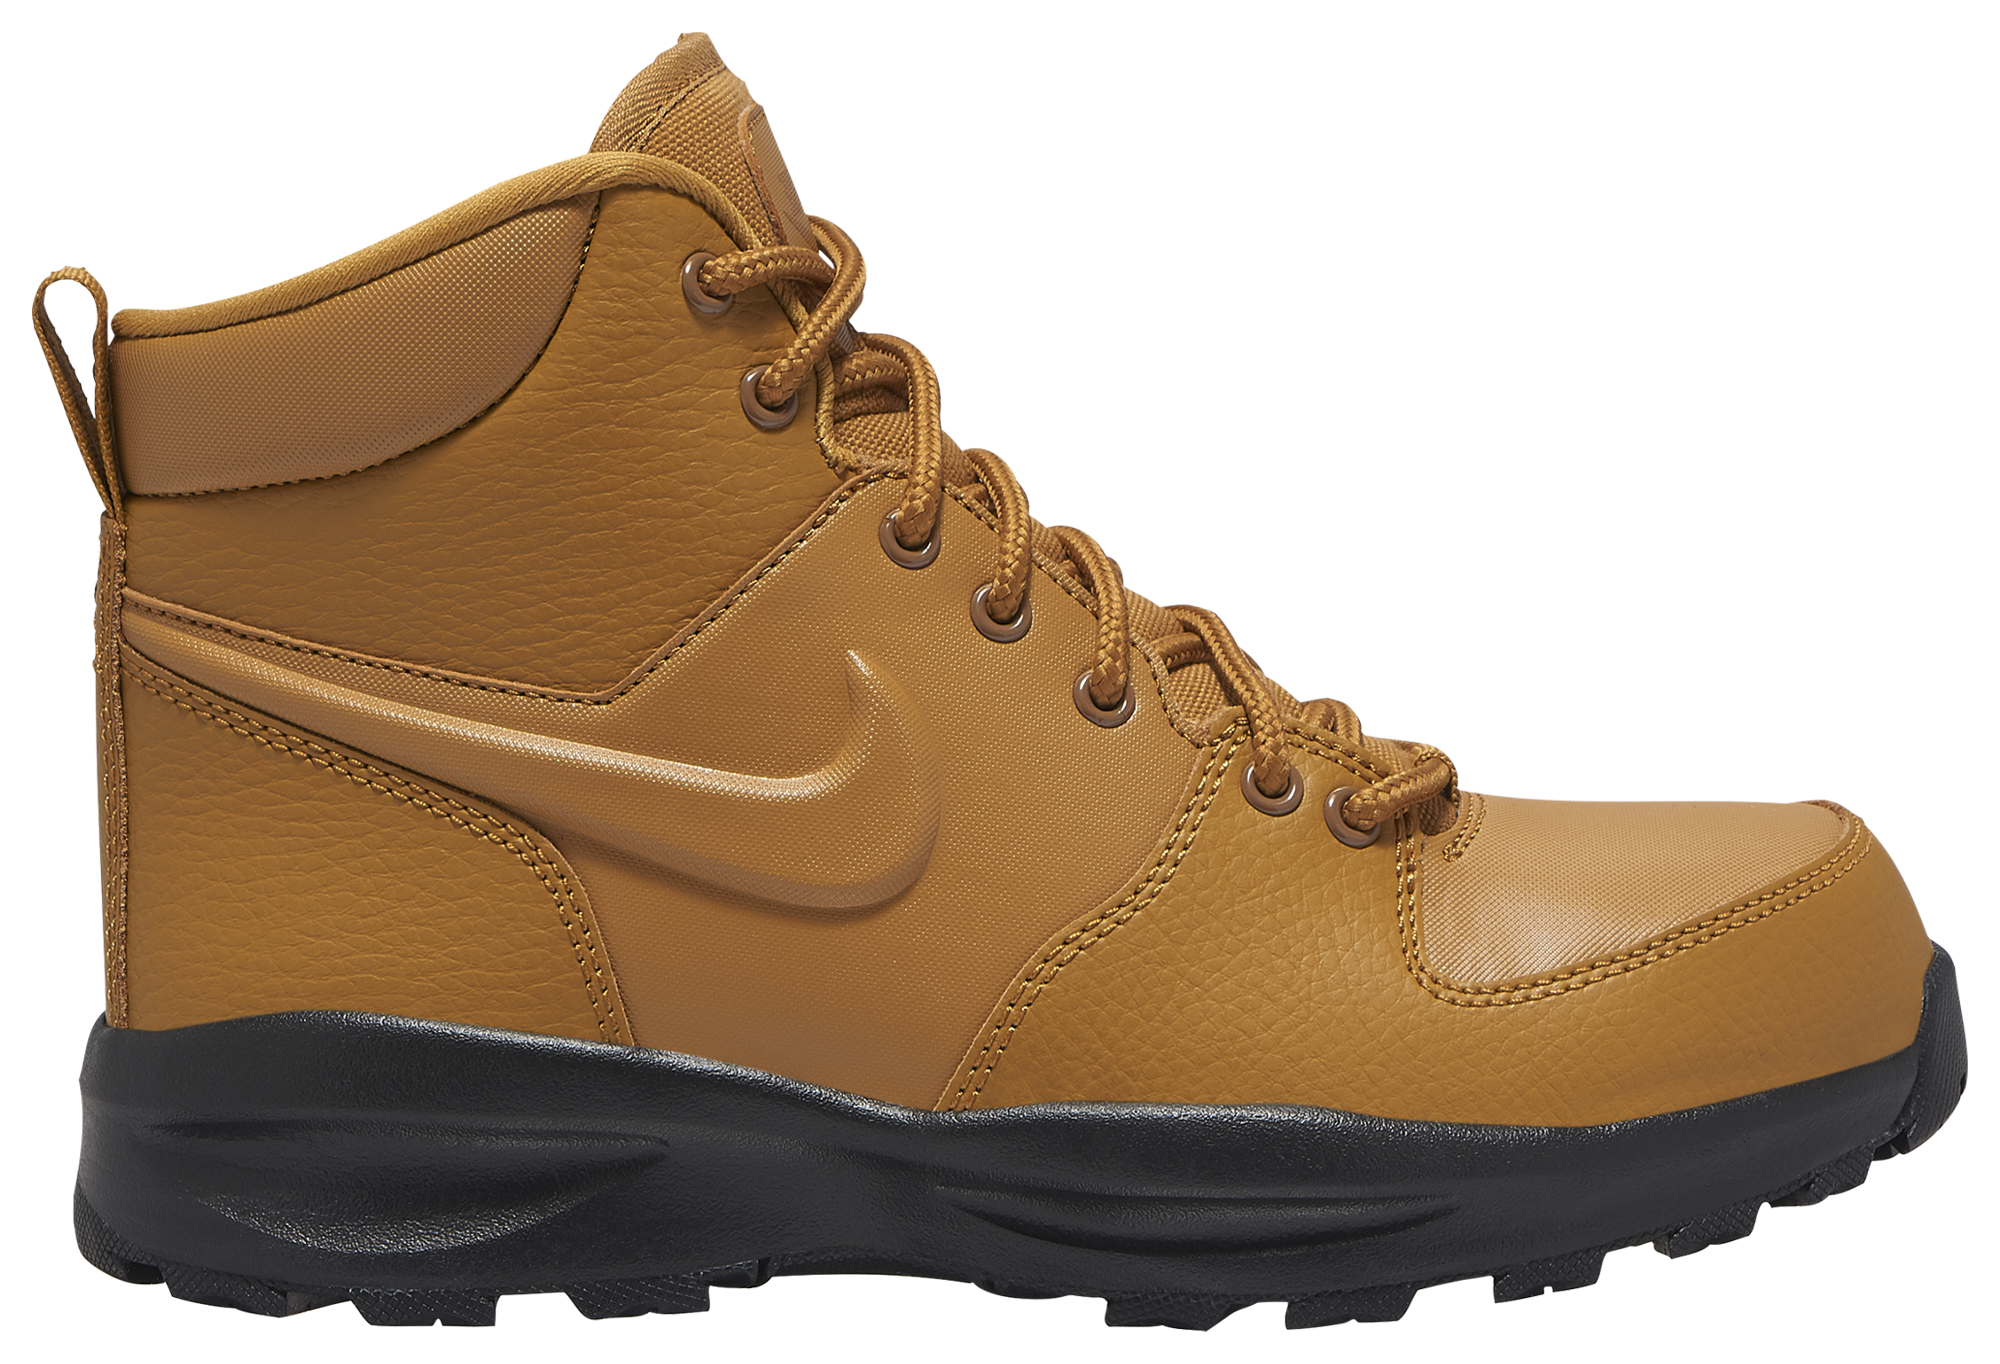 eastbay nike boots